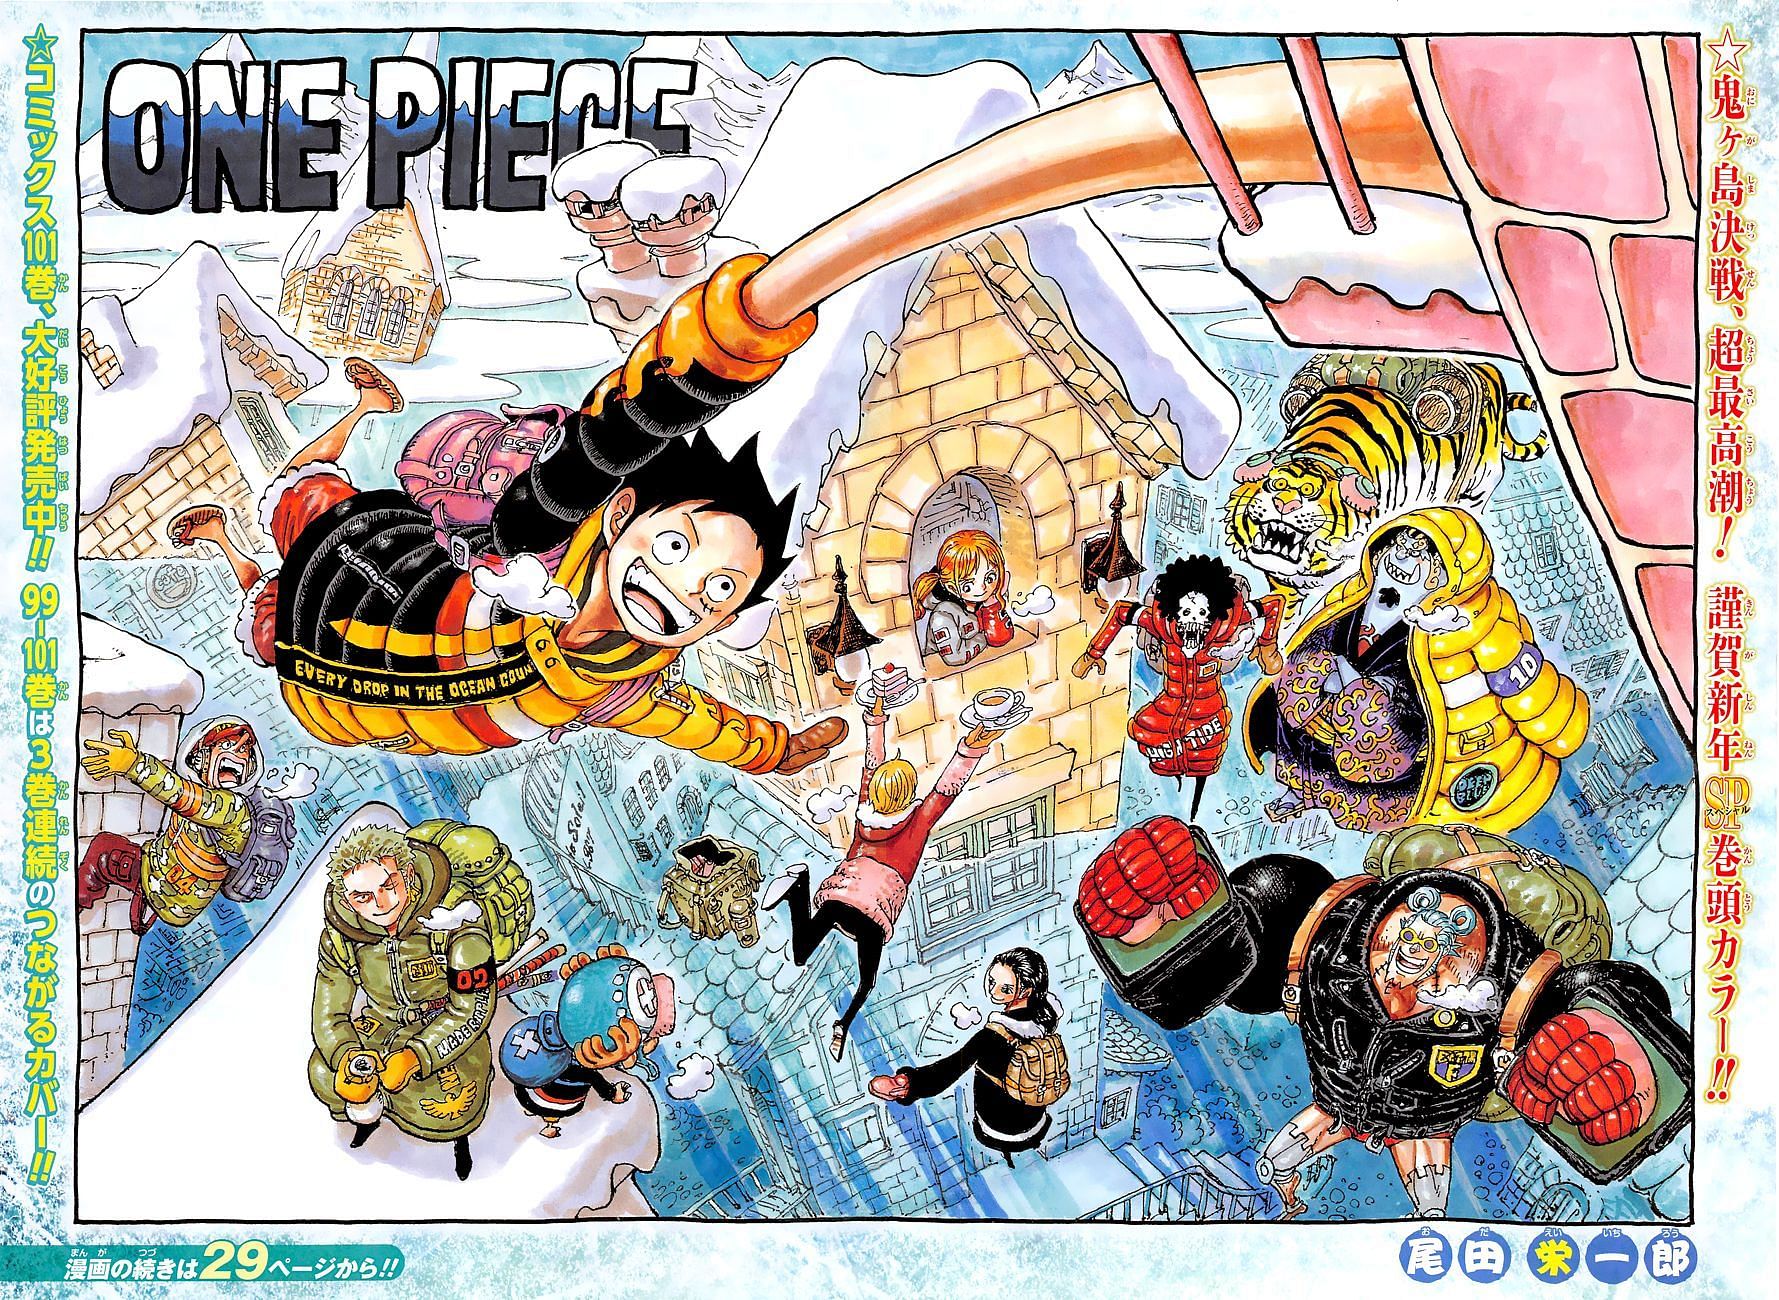 The color spread seen in the beginning of One Piece Chapter 1036. (Image via onepiecechapters.com)